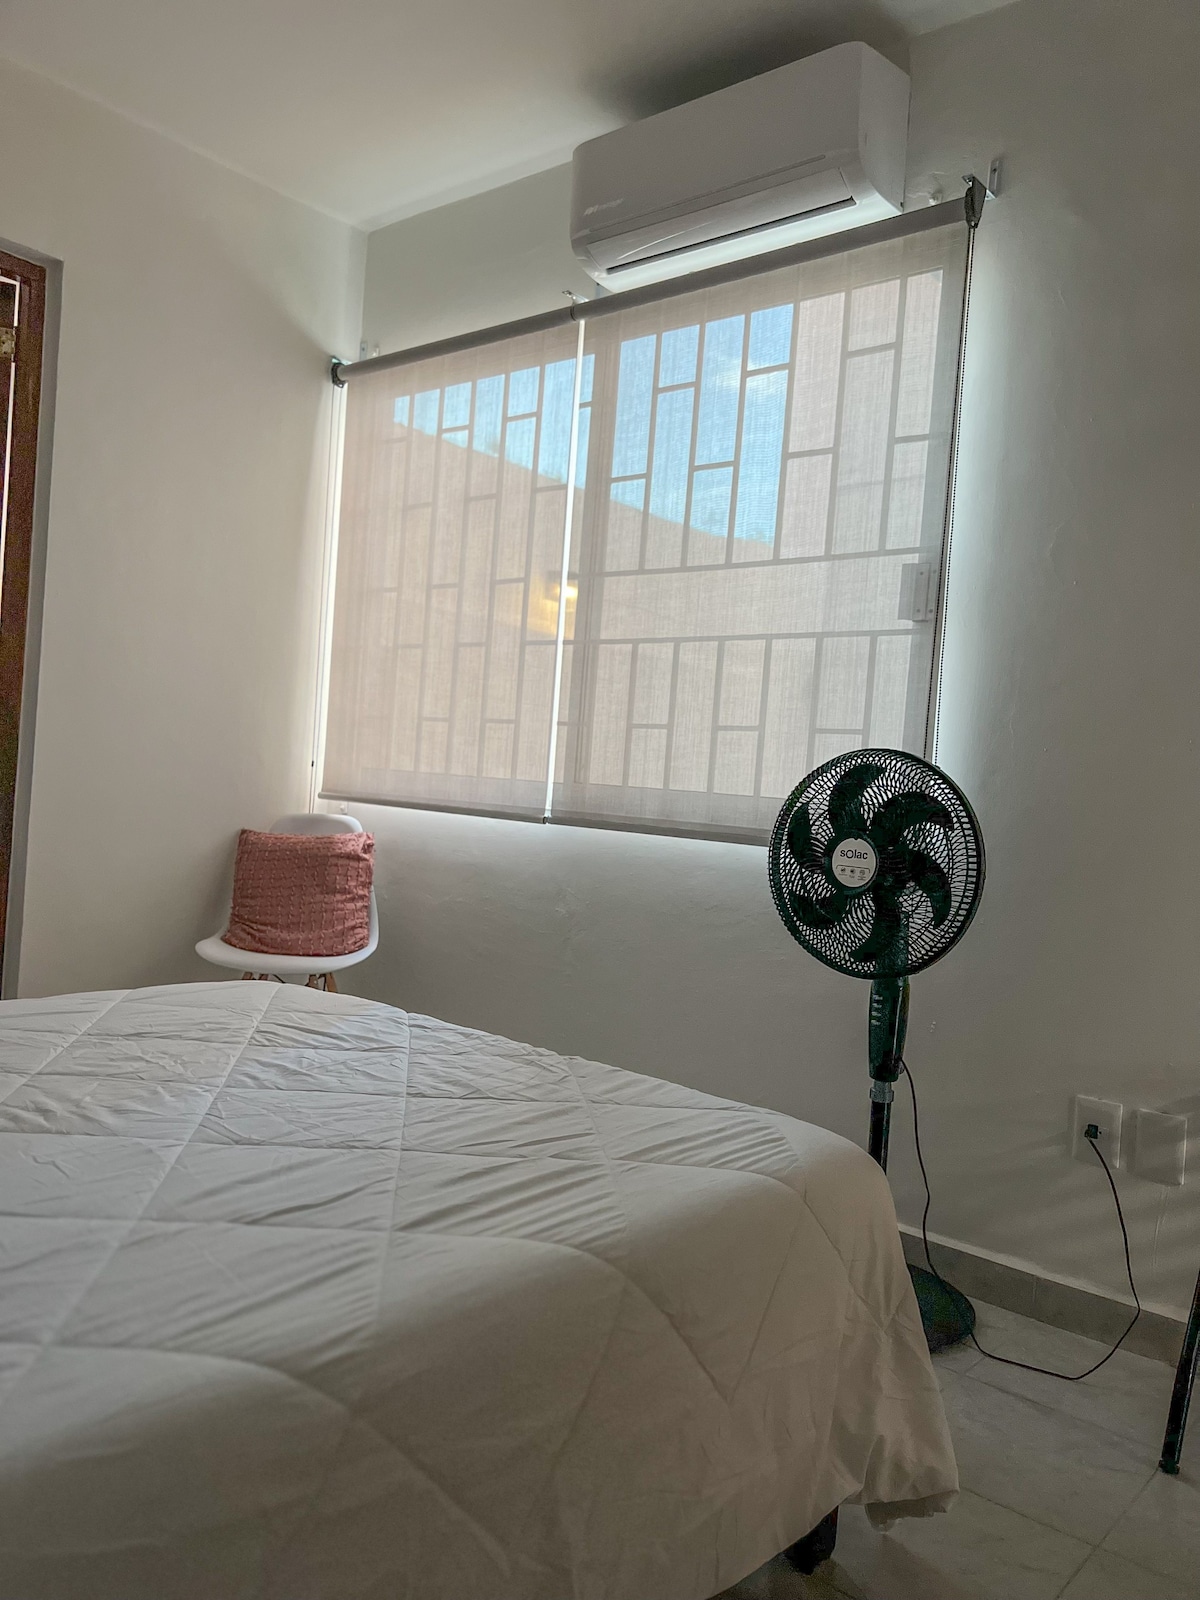 Well located airconditioned apartment. We invoice!